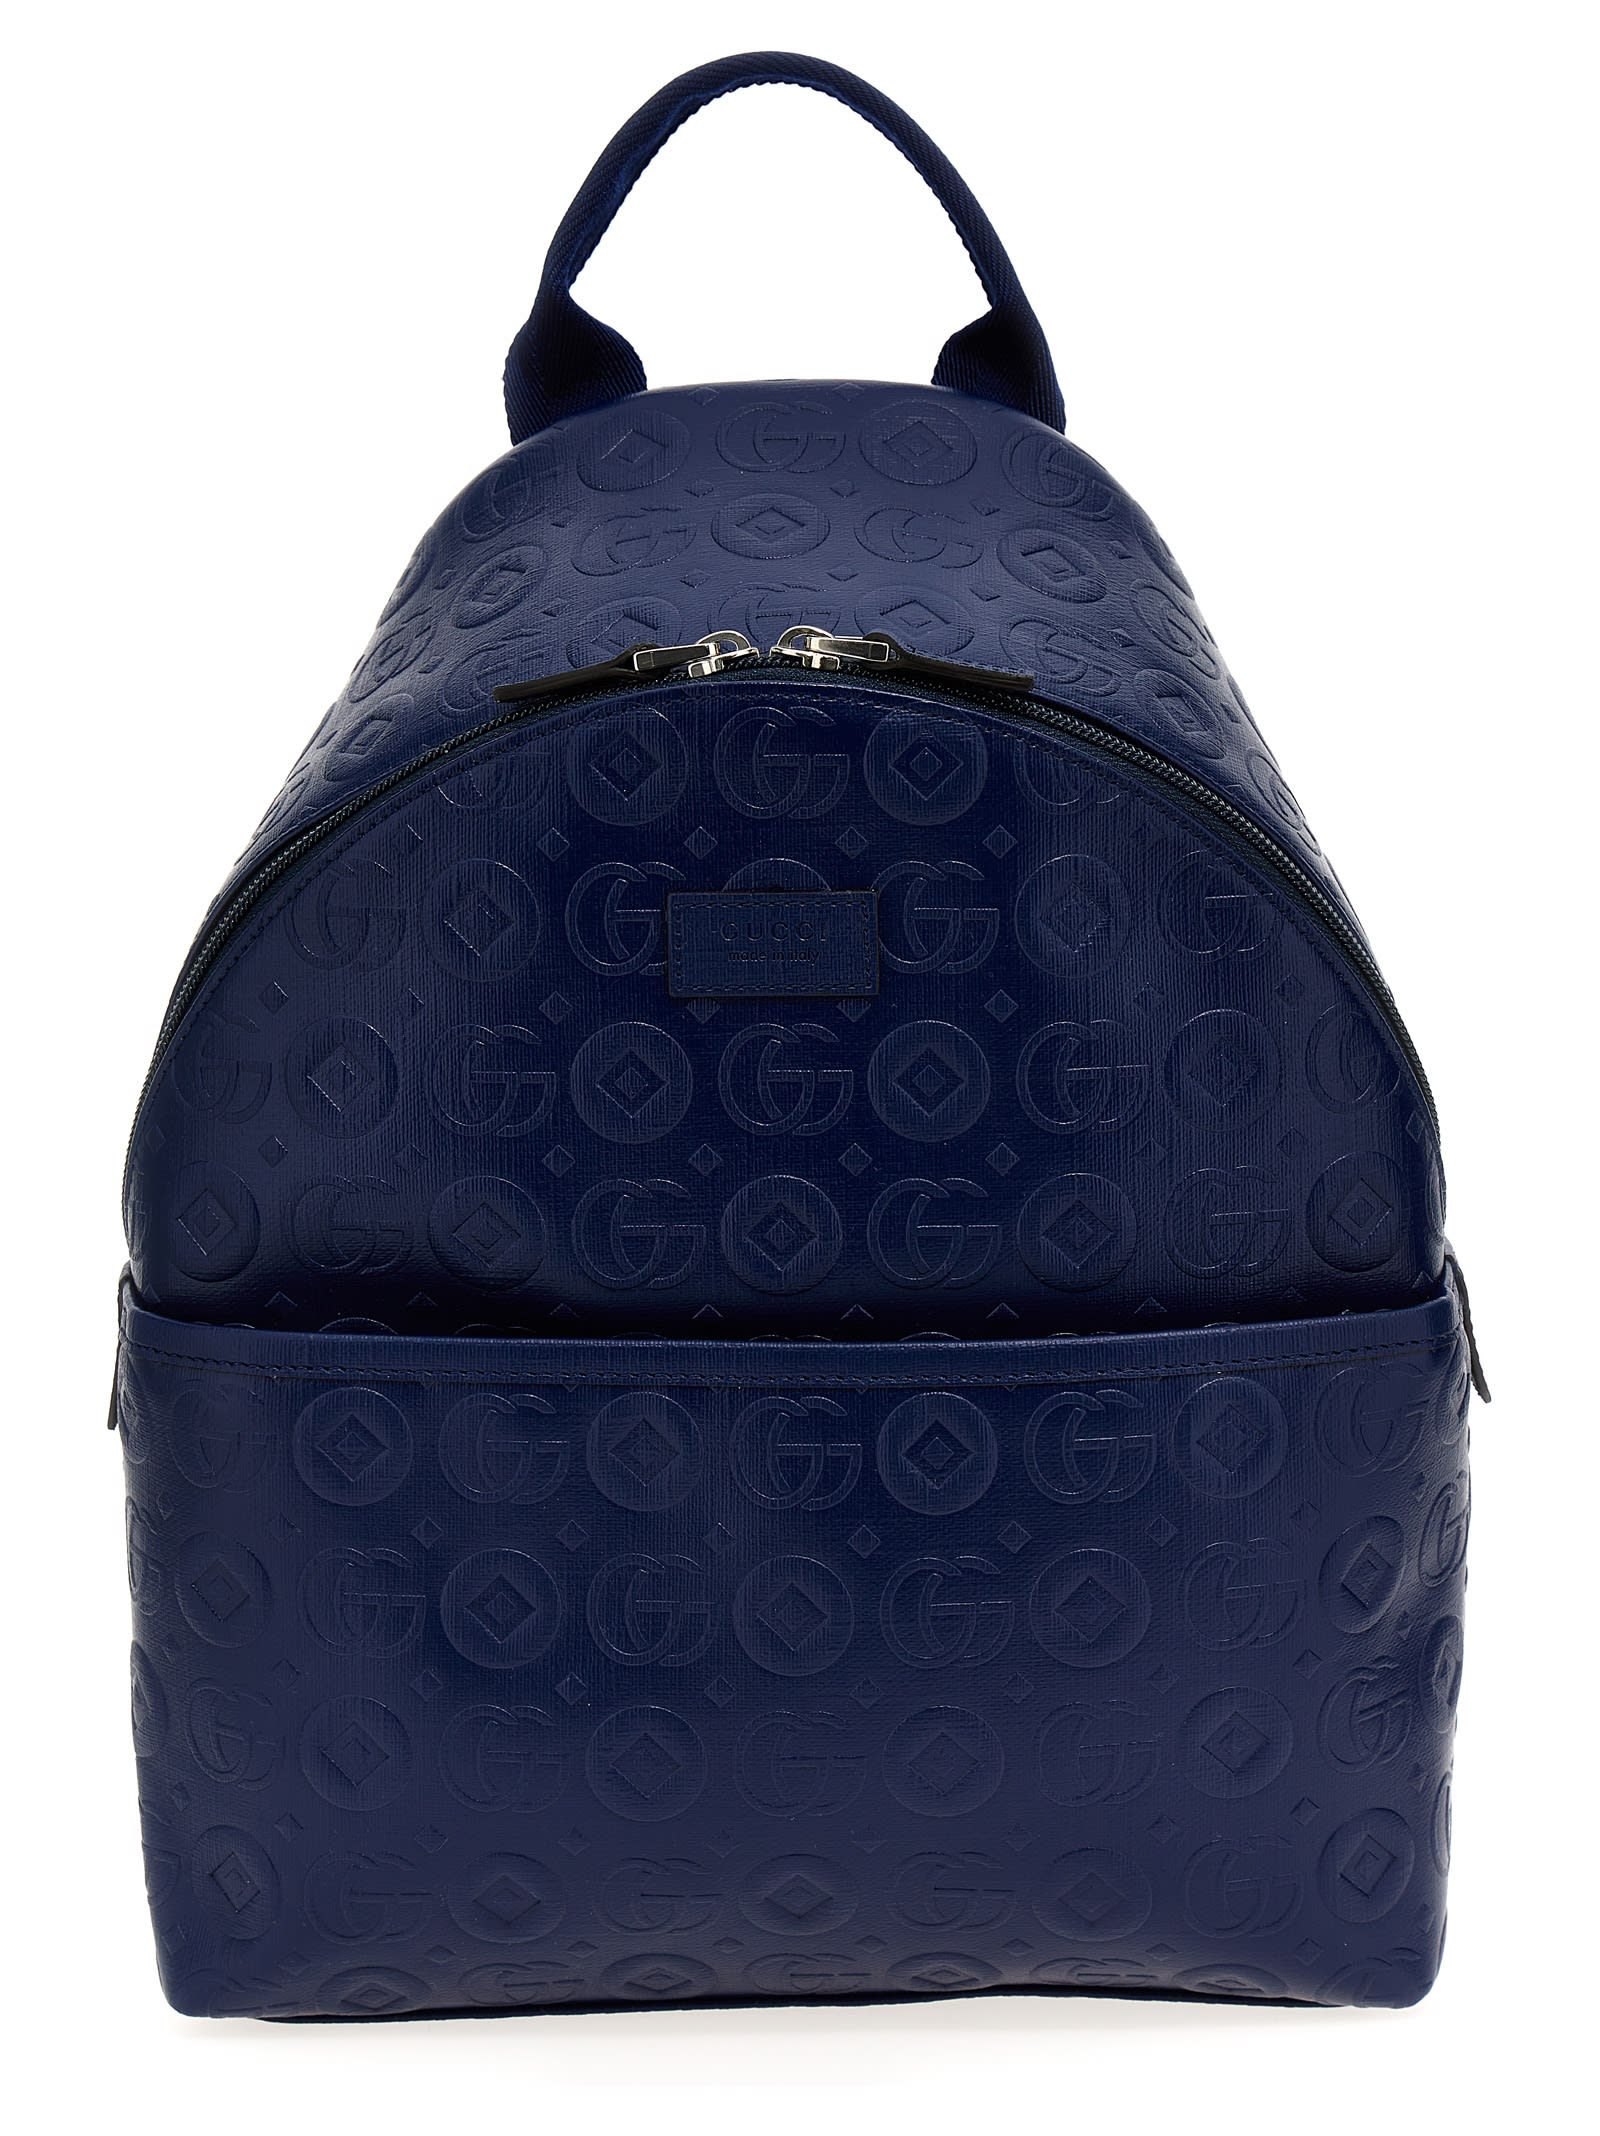 Gucci double G Backpack